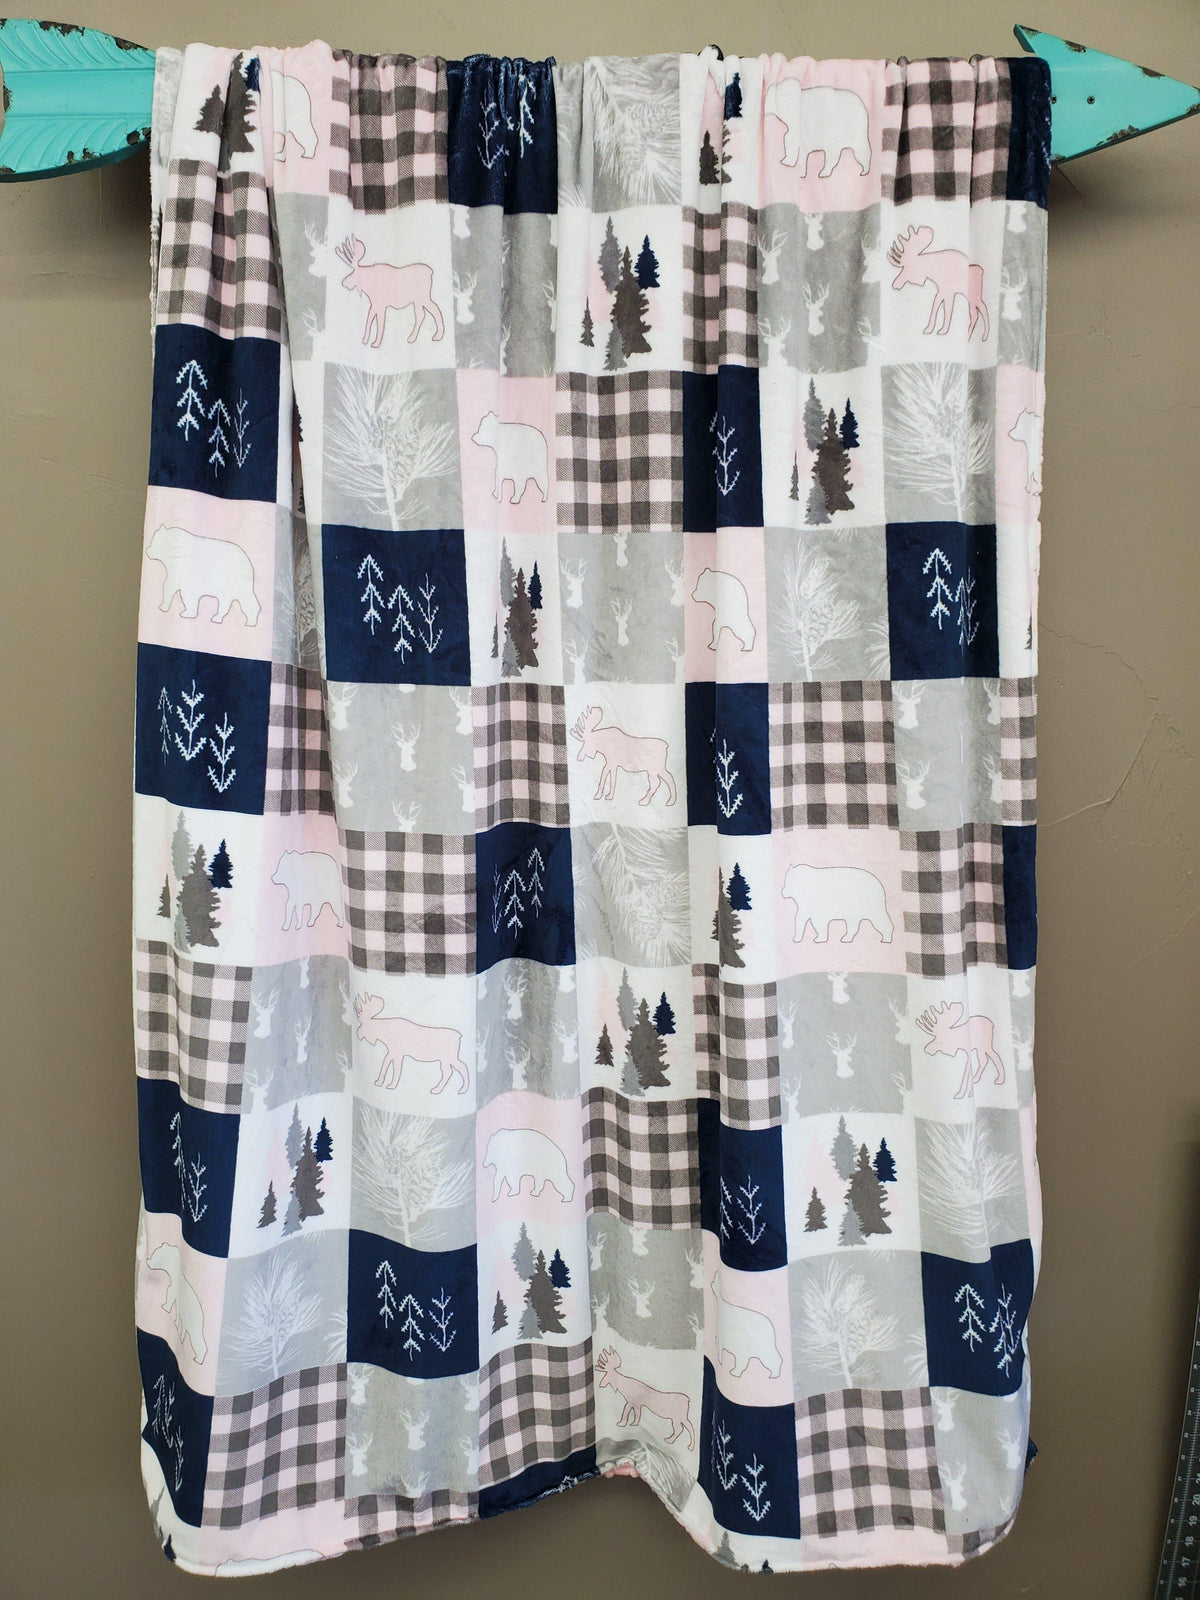 Twin, Full, or Queen Blanket - Patchwork Print Woodland Minky in Blush and Navy - DBC Baby Bedding Co 